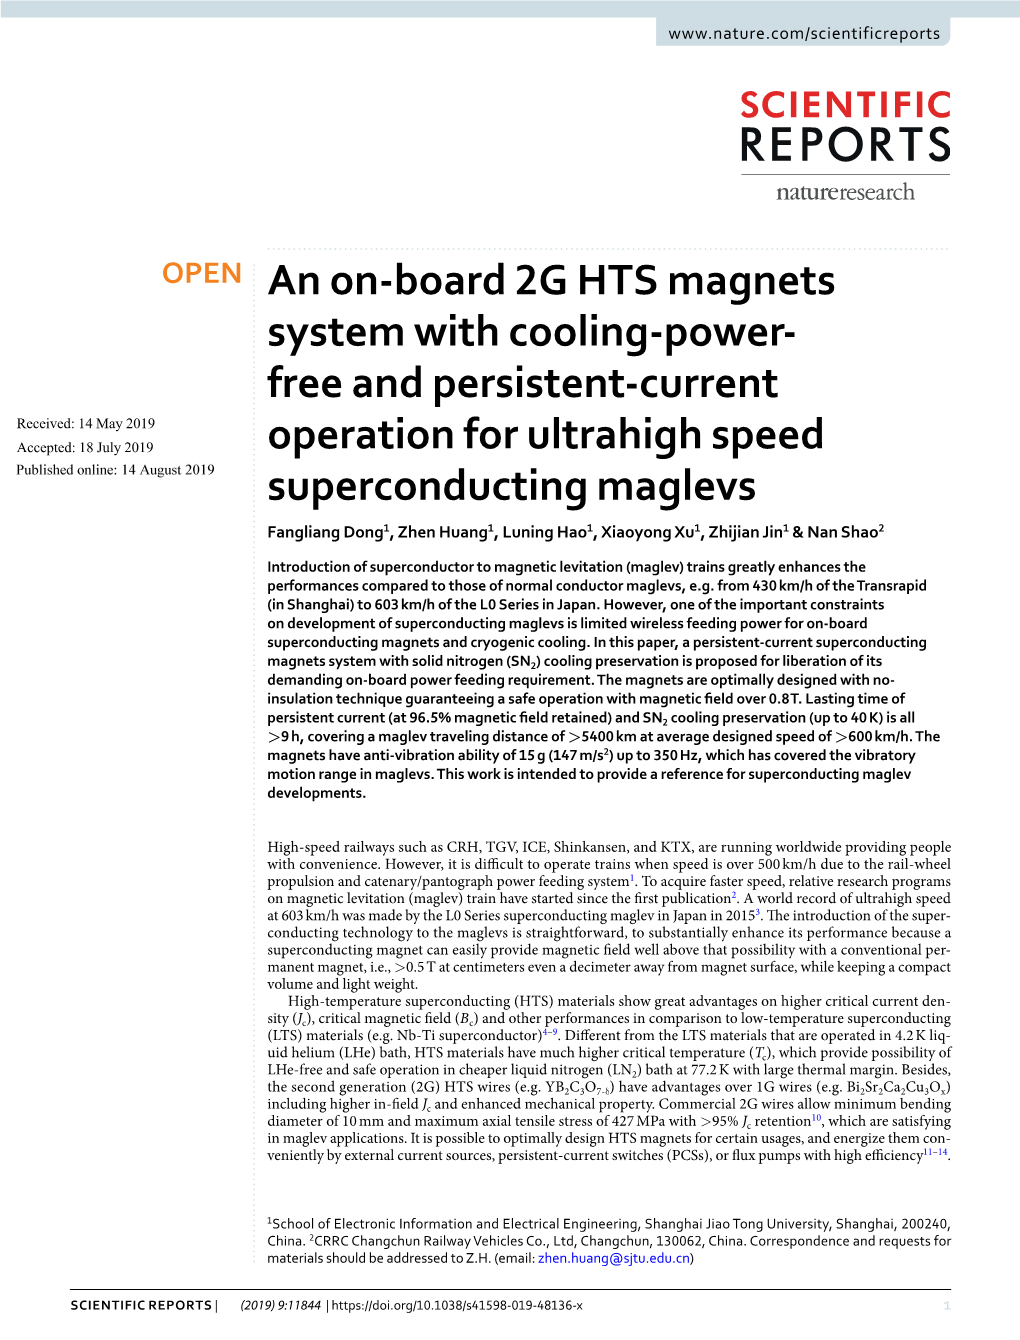 An On-Board 2G HTS Magnets System with Cooling-Power